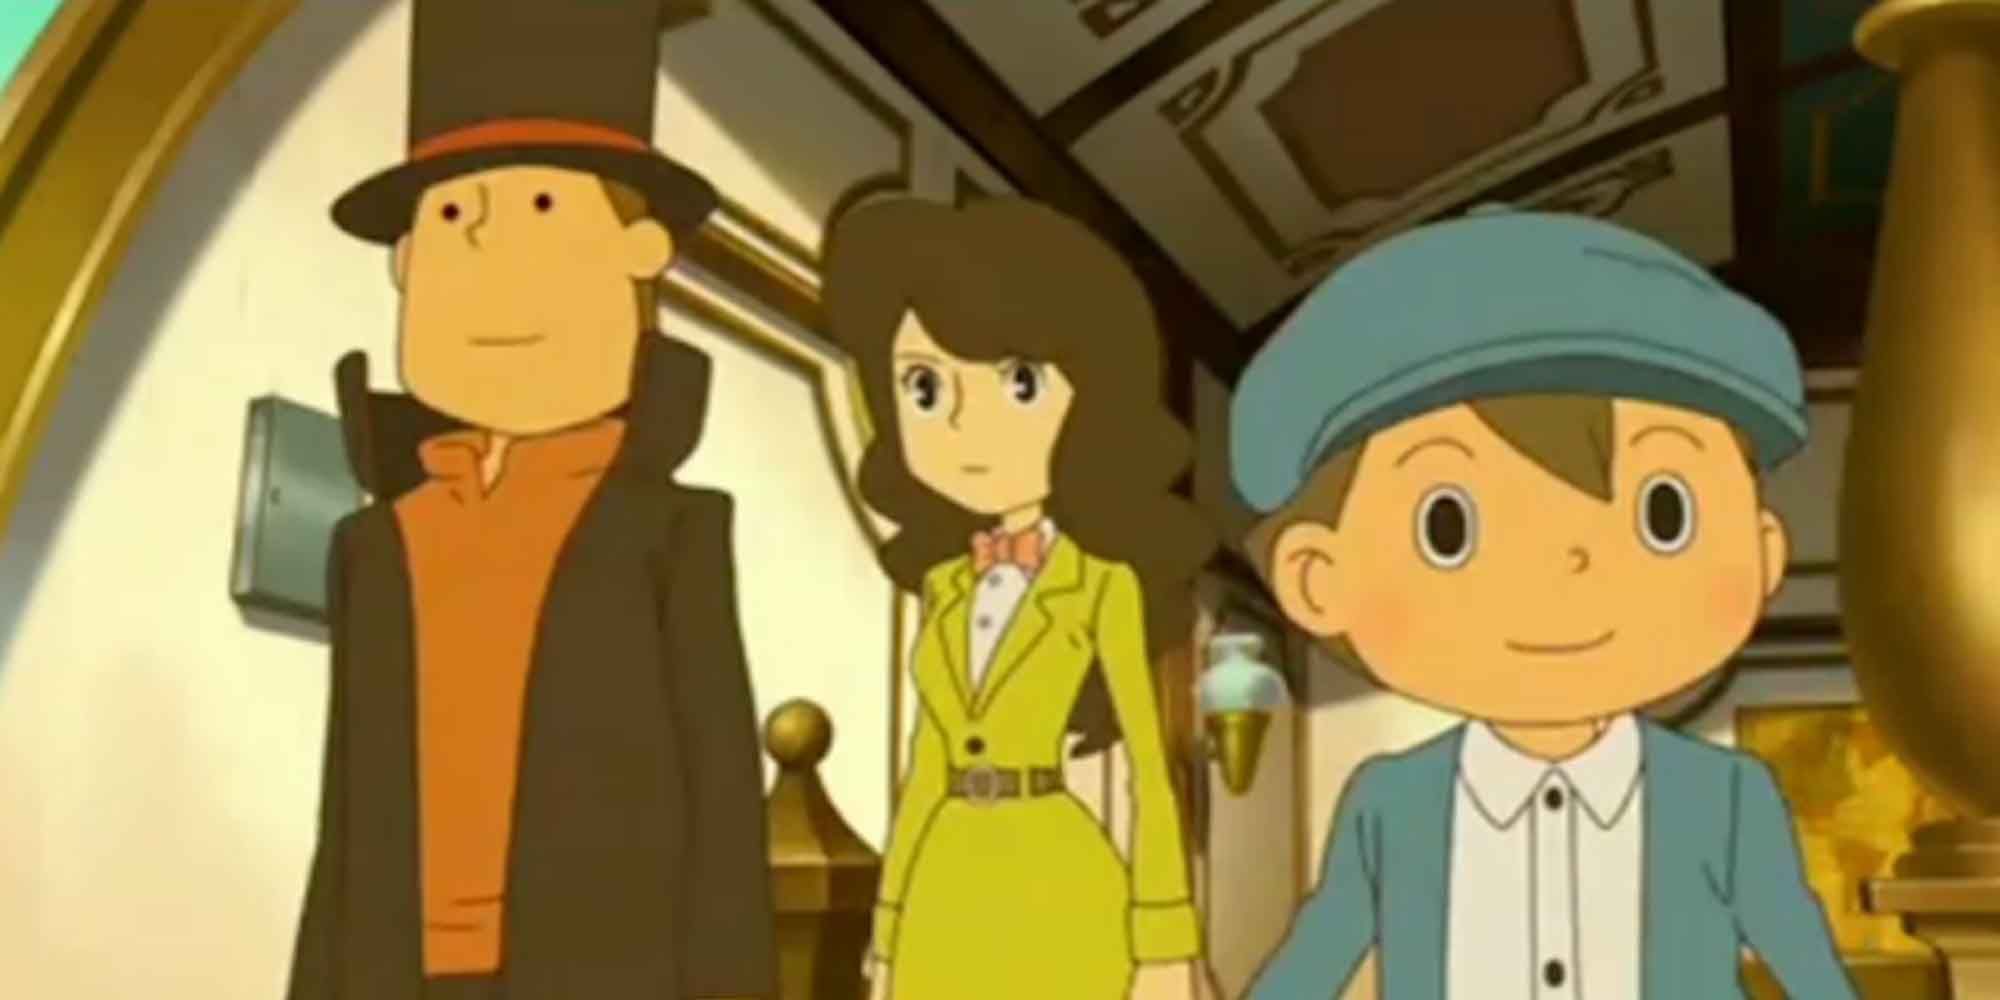 Professor Layton and the Azlan Legacy for the Nintendo 3DS